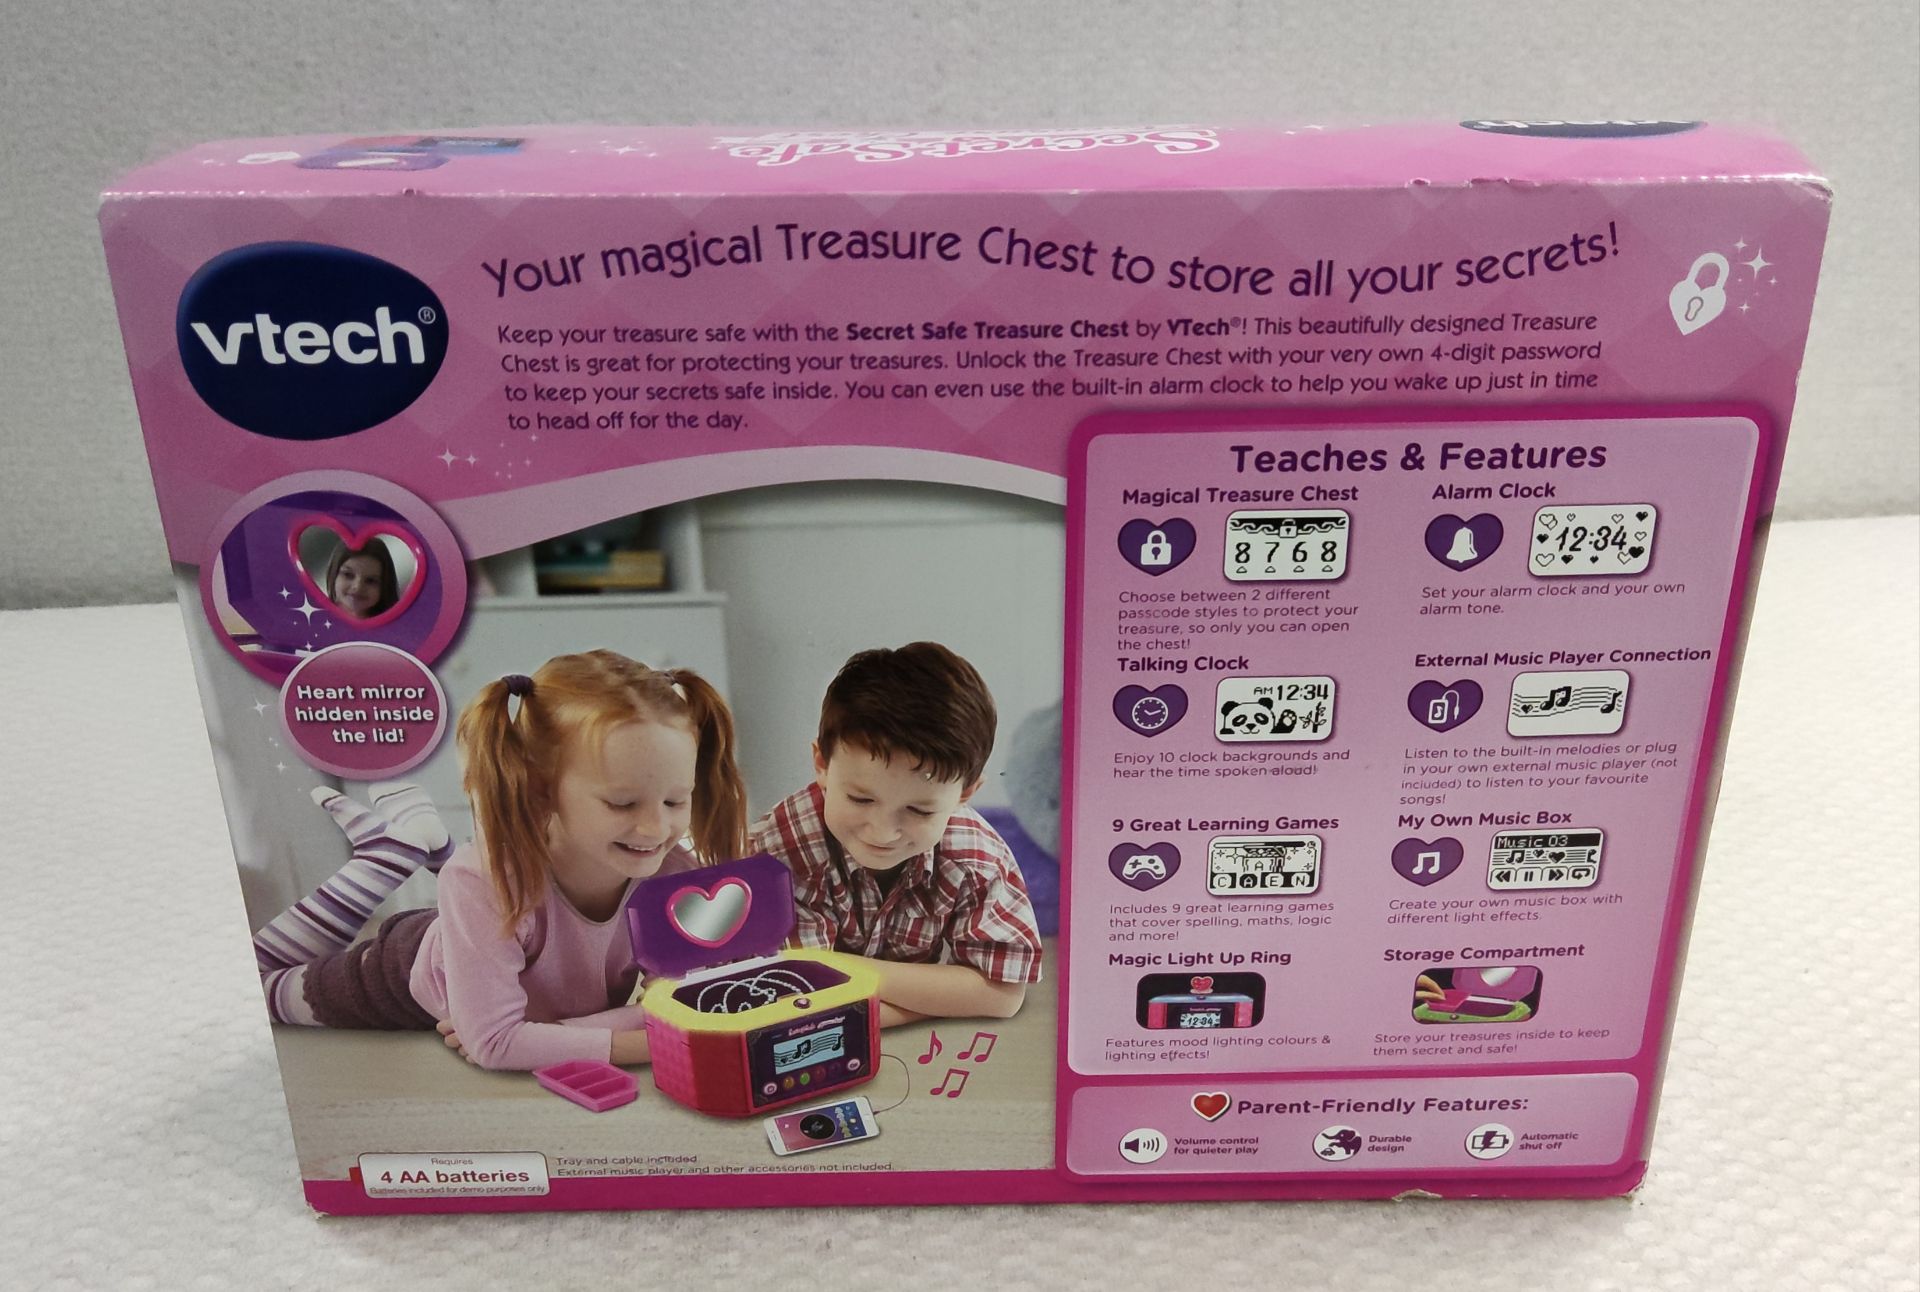 1 x Vtech 7-in-1 Secret Safe Treasure Chest - New/Boxed - Image 3 of 7